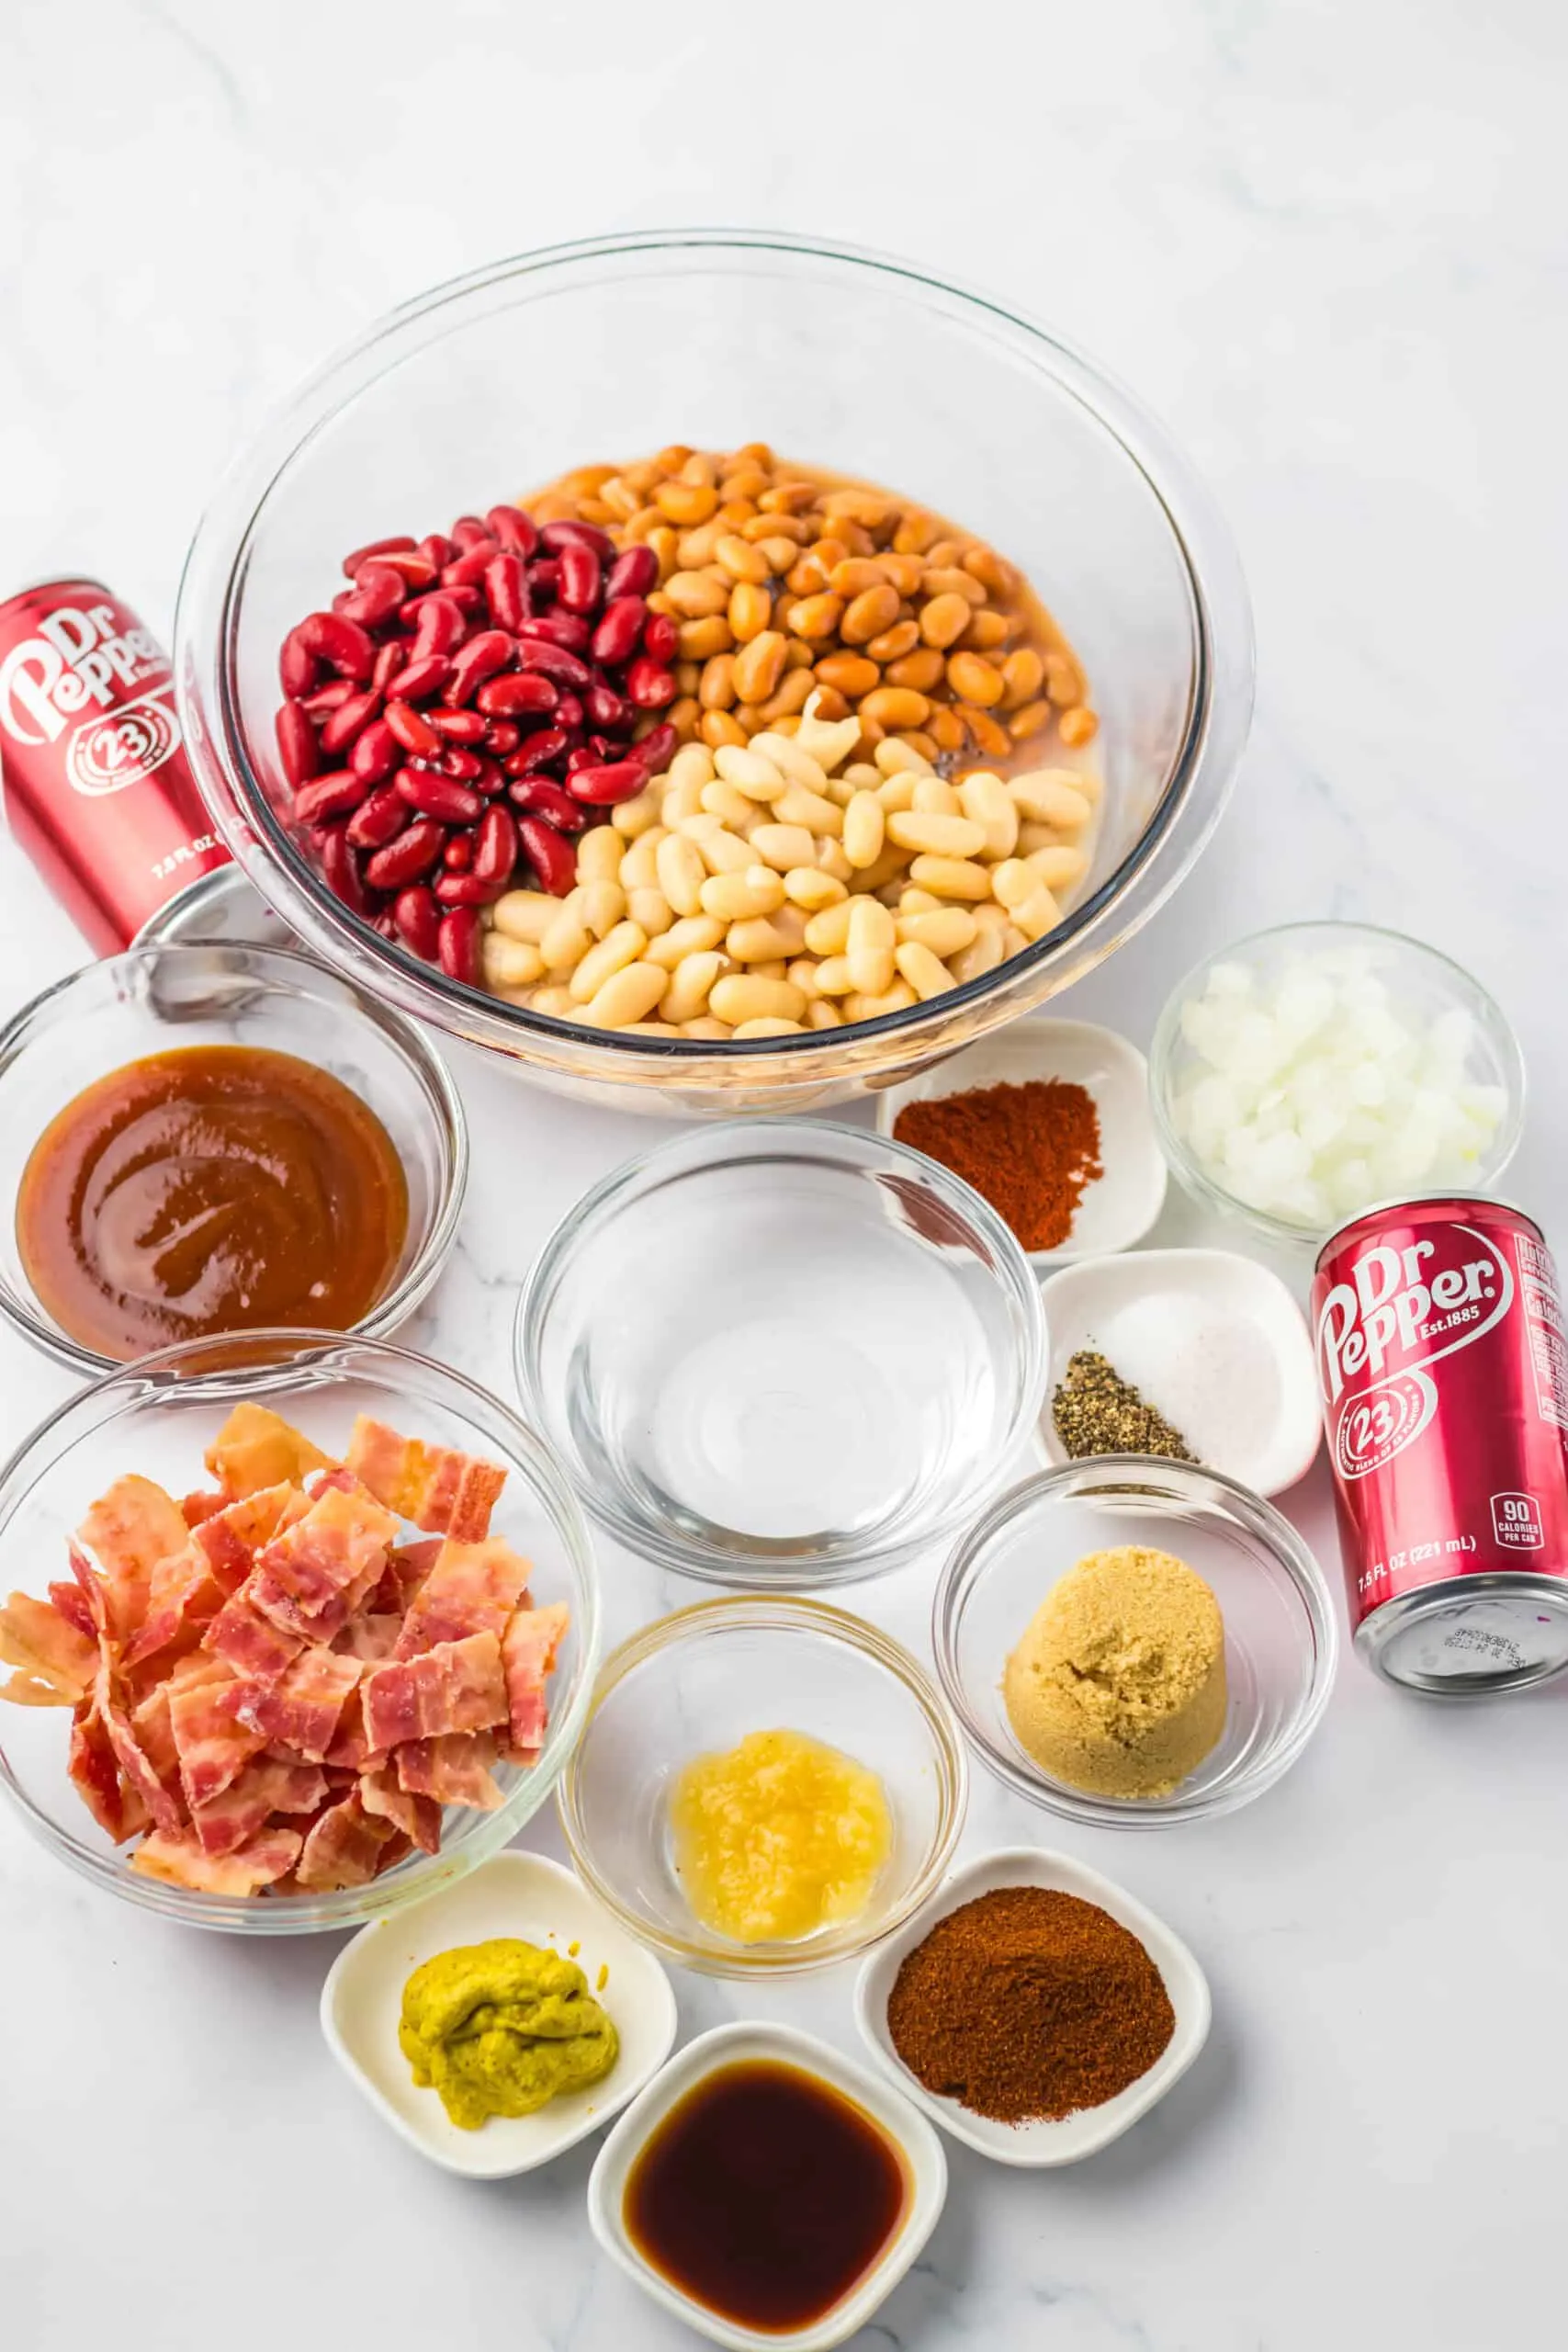 Slow Cooker Dr. Pepper Baked Beans ingredients